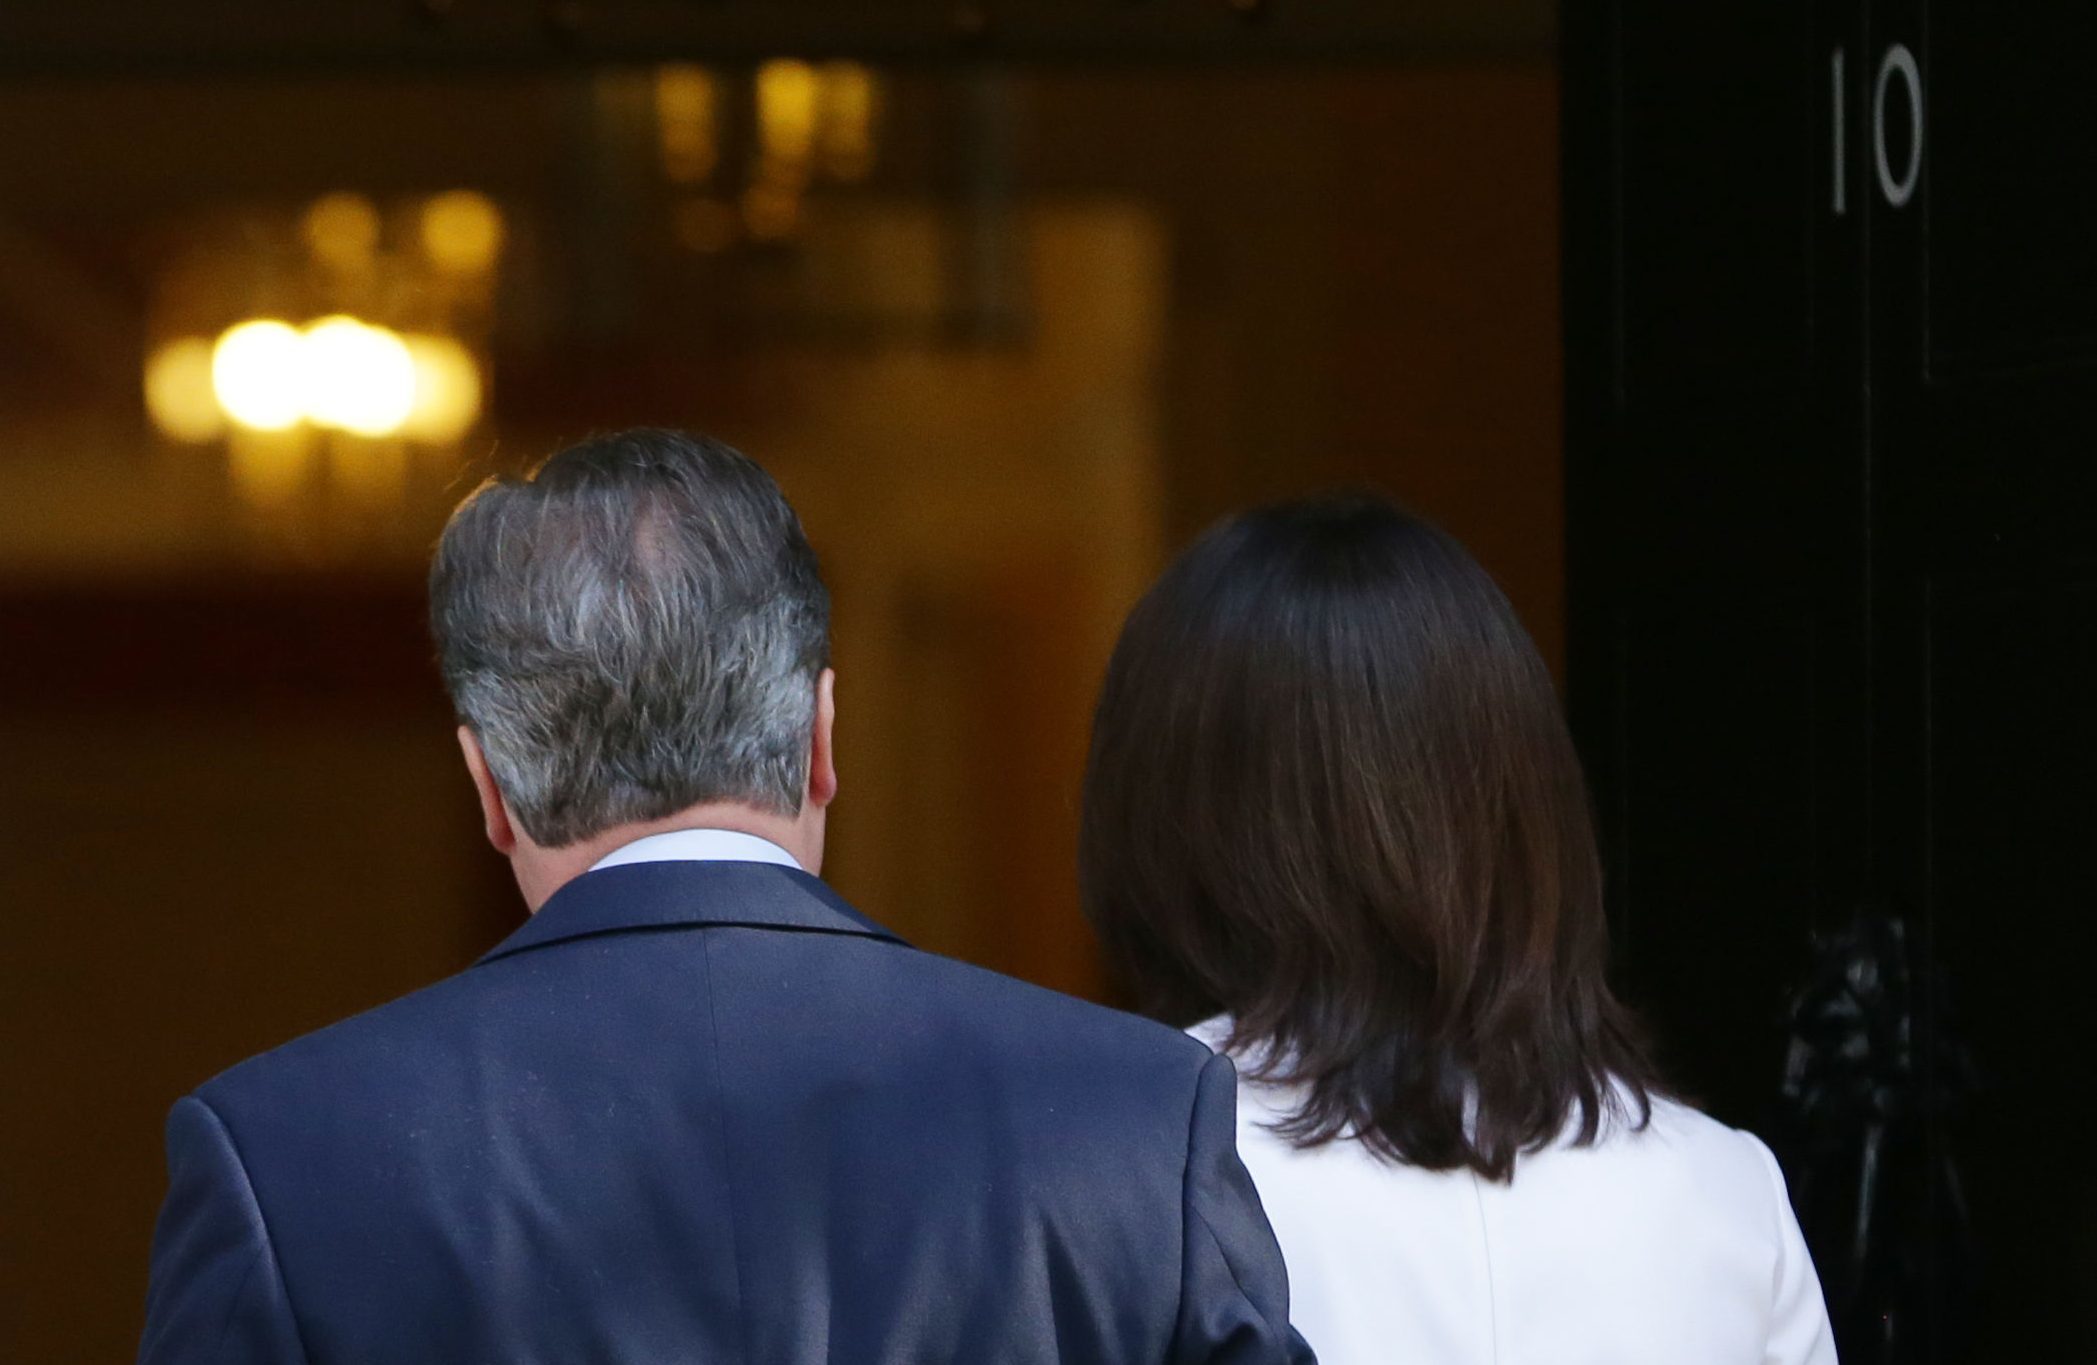 Prime Minister David Cameron heads back into Downing Street with wife Samantha after confirming his intention to resign.